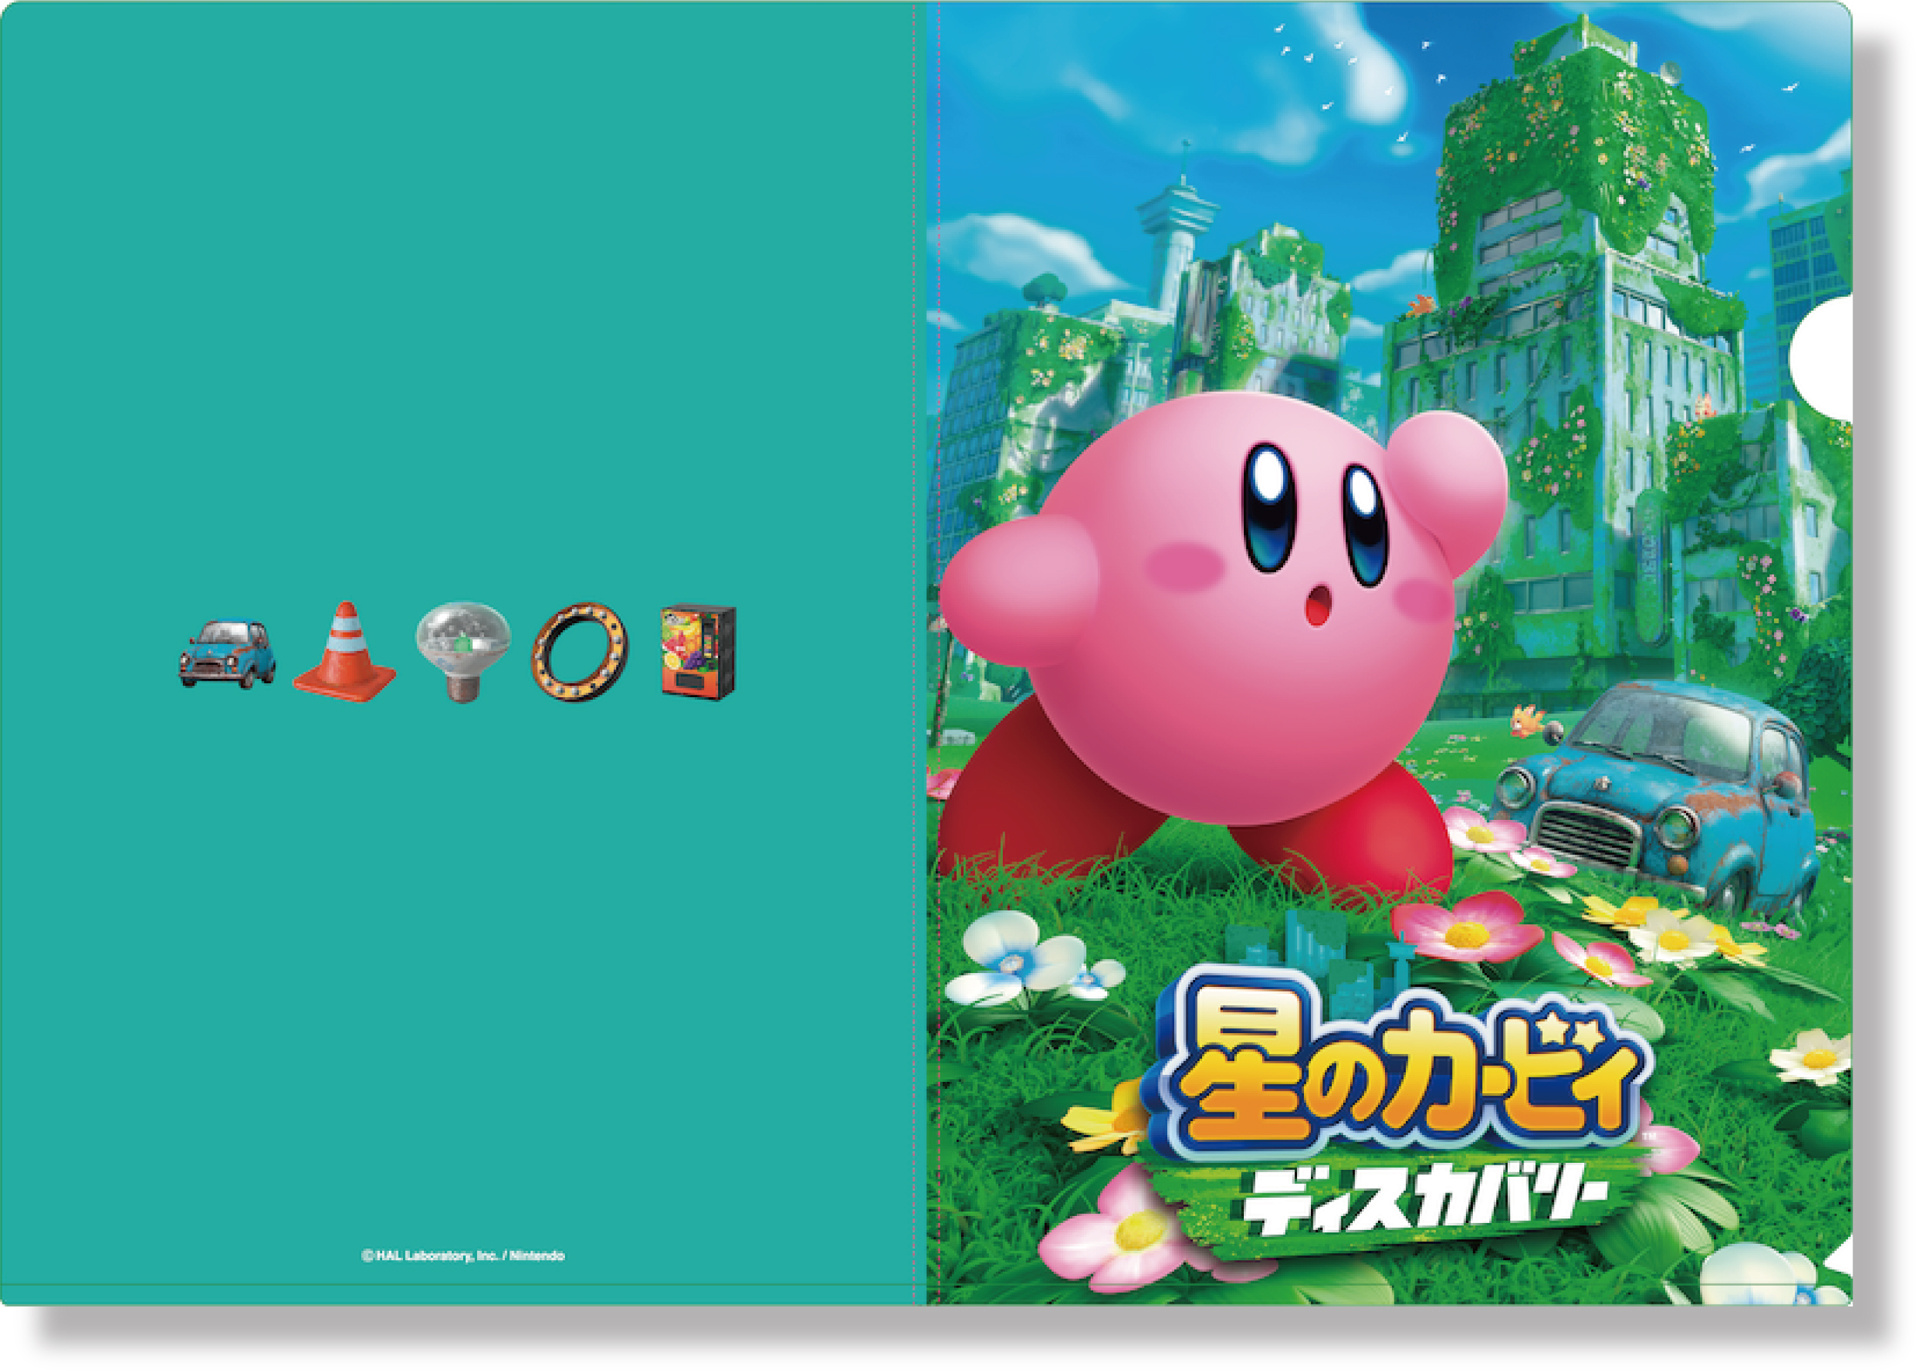 Clear File Main Kirby And The Forgotten Land